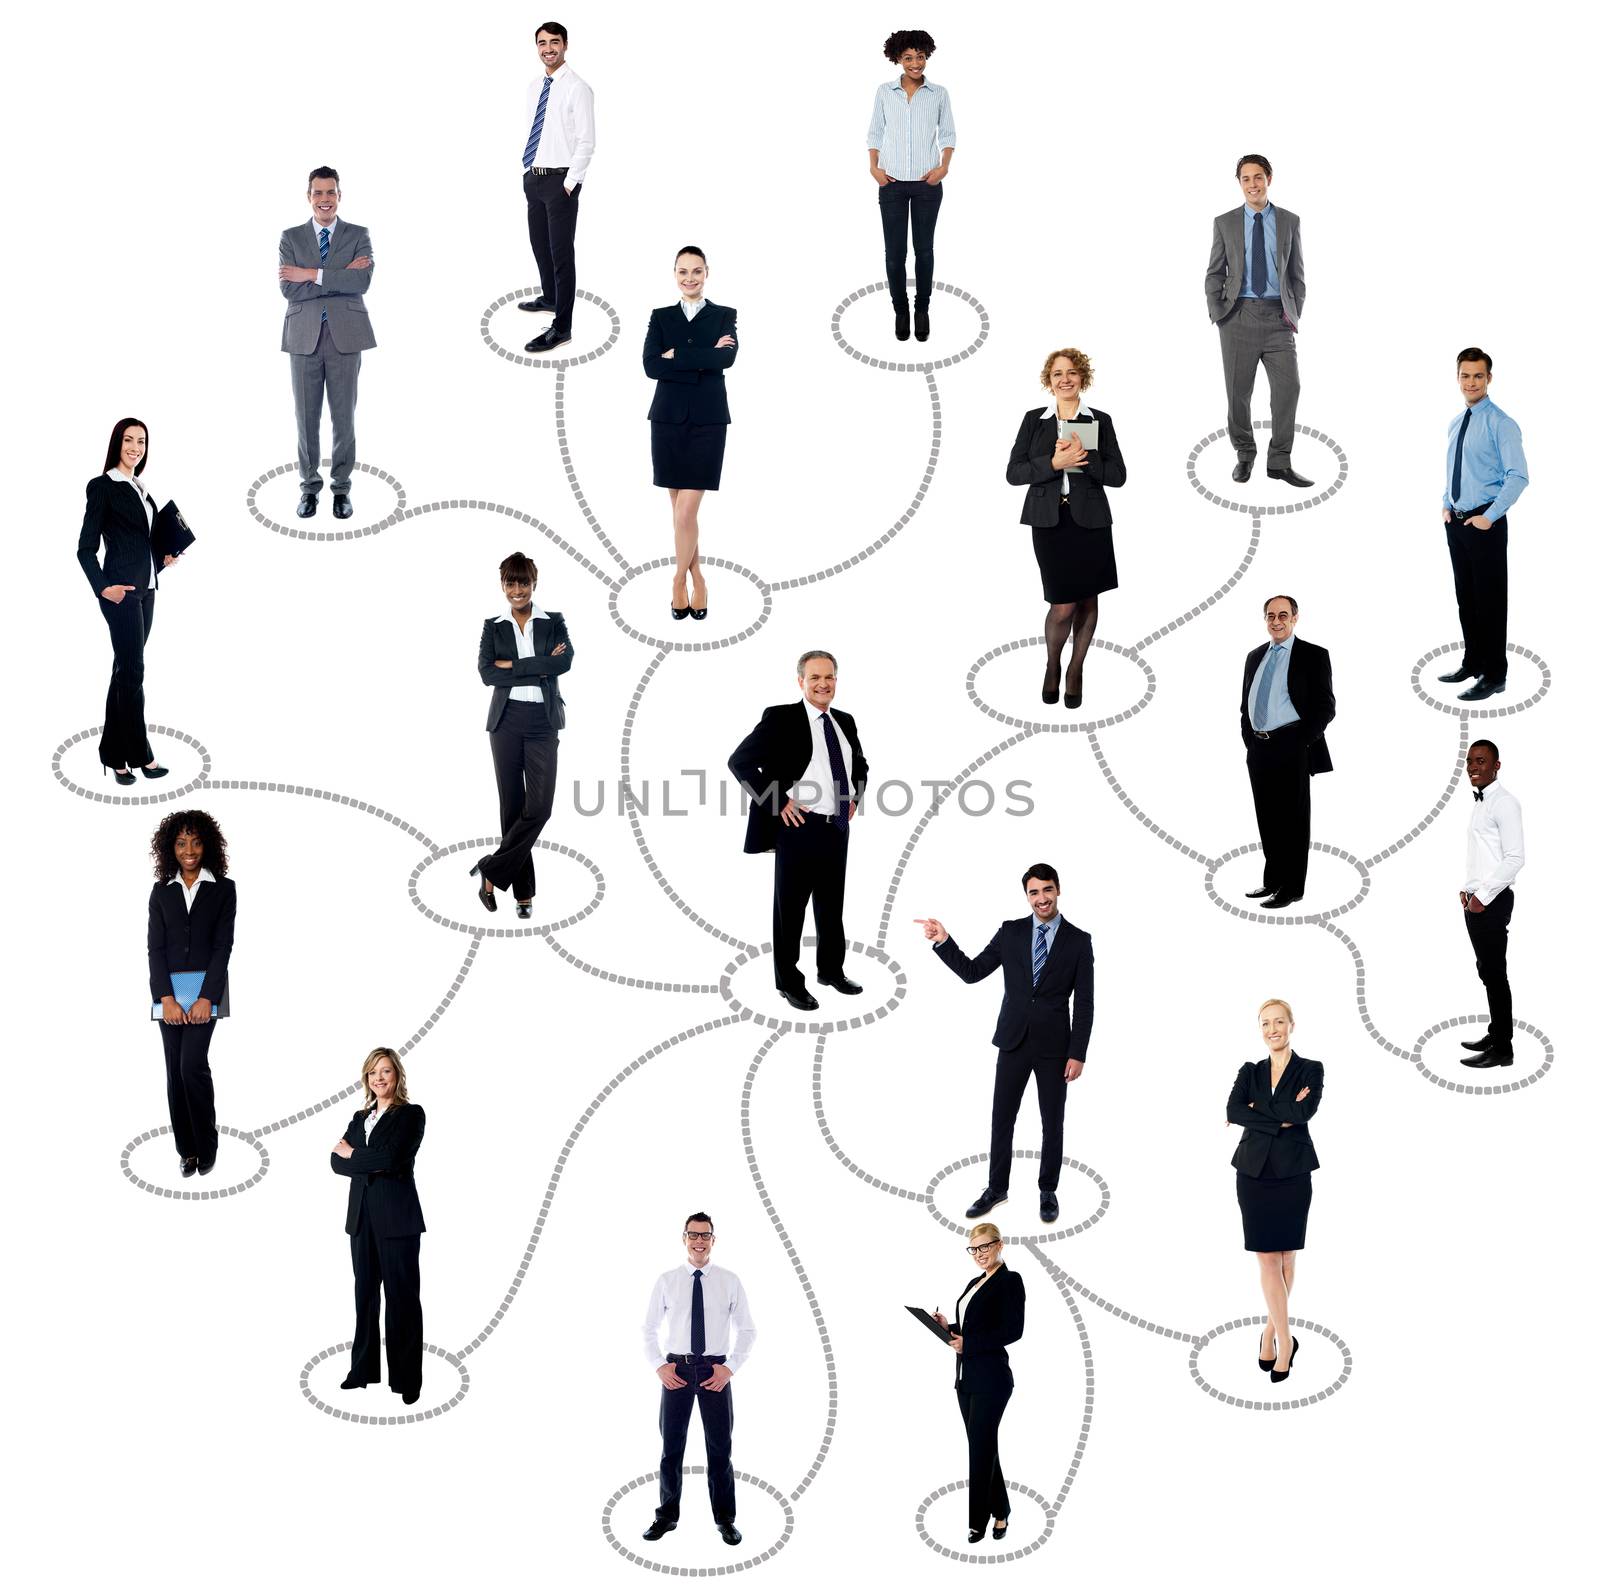 Social networking between business people by stockyimages